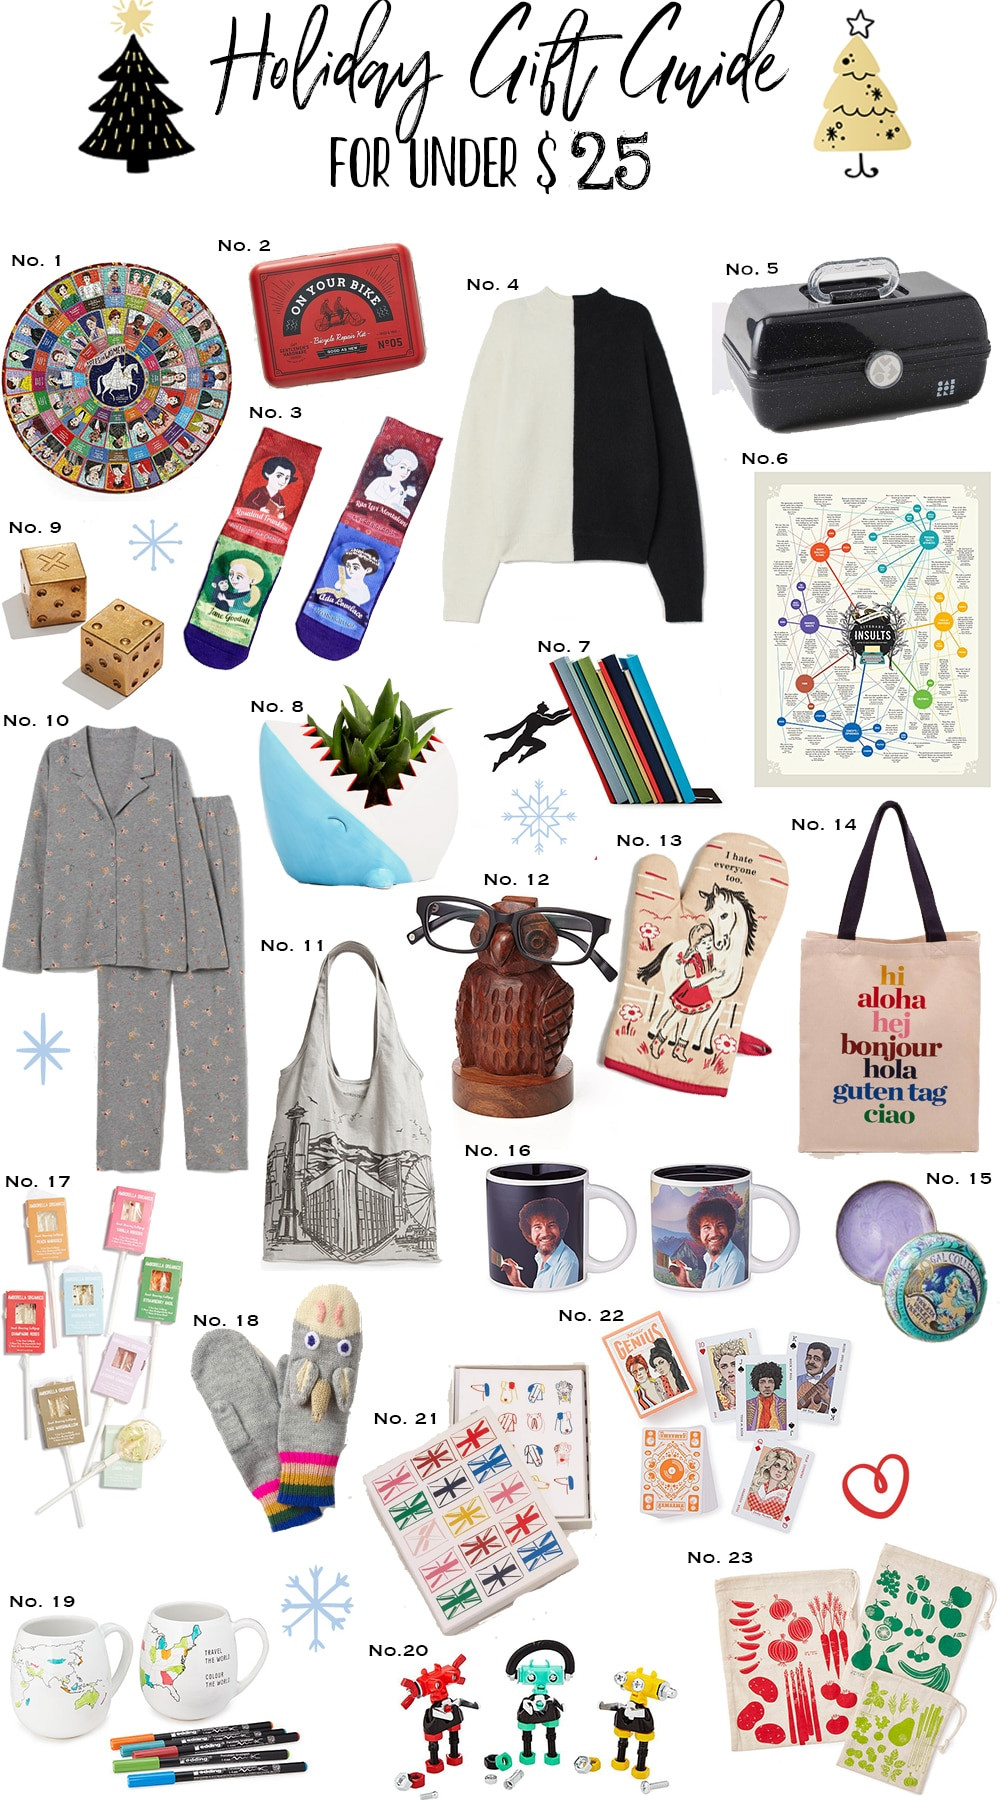 Holiday Gift Ideas For Employees Under $25
 Holiday Gift Guide under $25 and some Weekly Reads